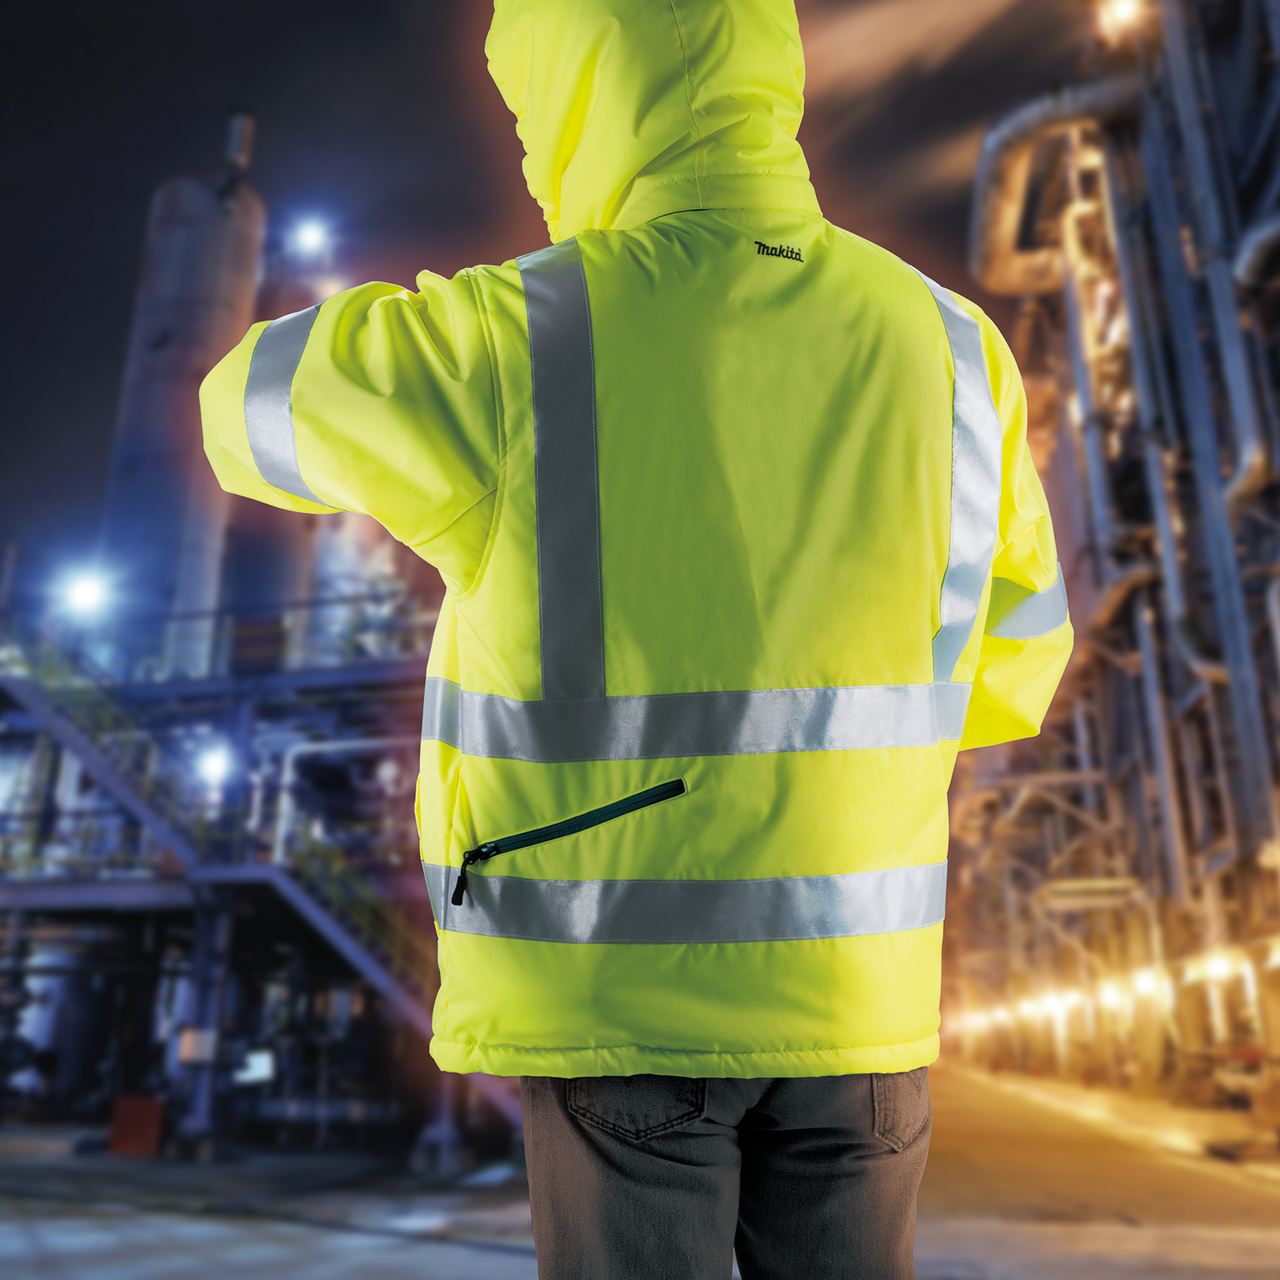 18V LXT? Lithium-Ion Cordless High Visibility Heated Jacket, Jacket Only (XL)  FIND LOCAL SHOP ONLINE, DCJ206ZXL